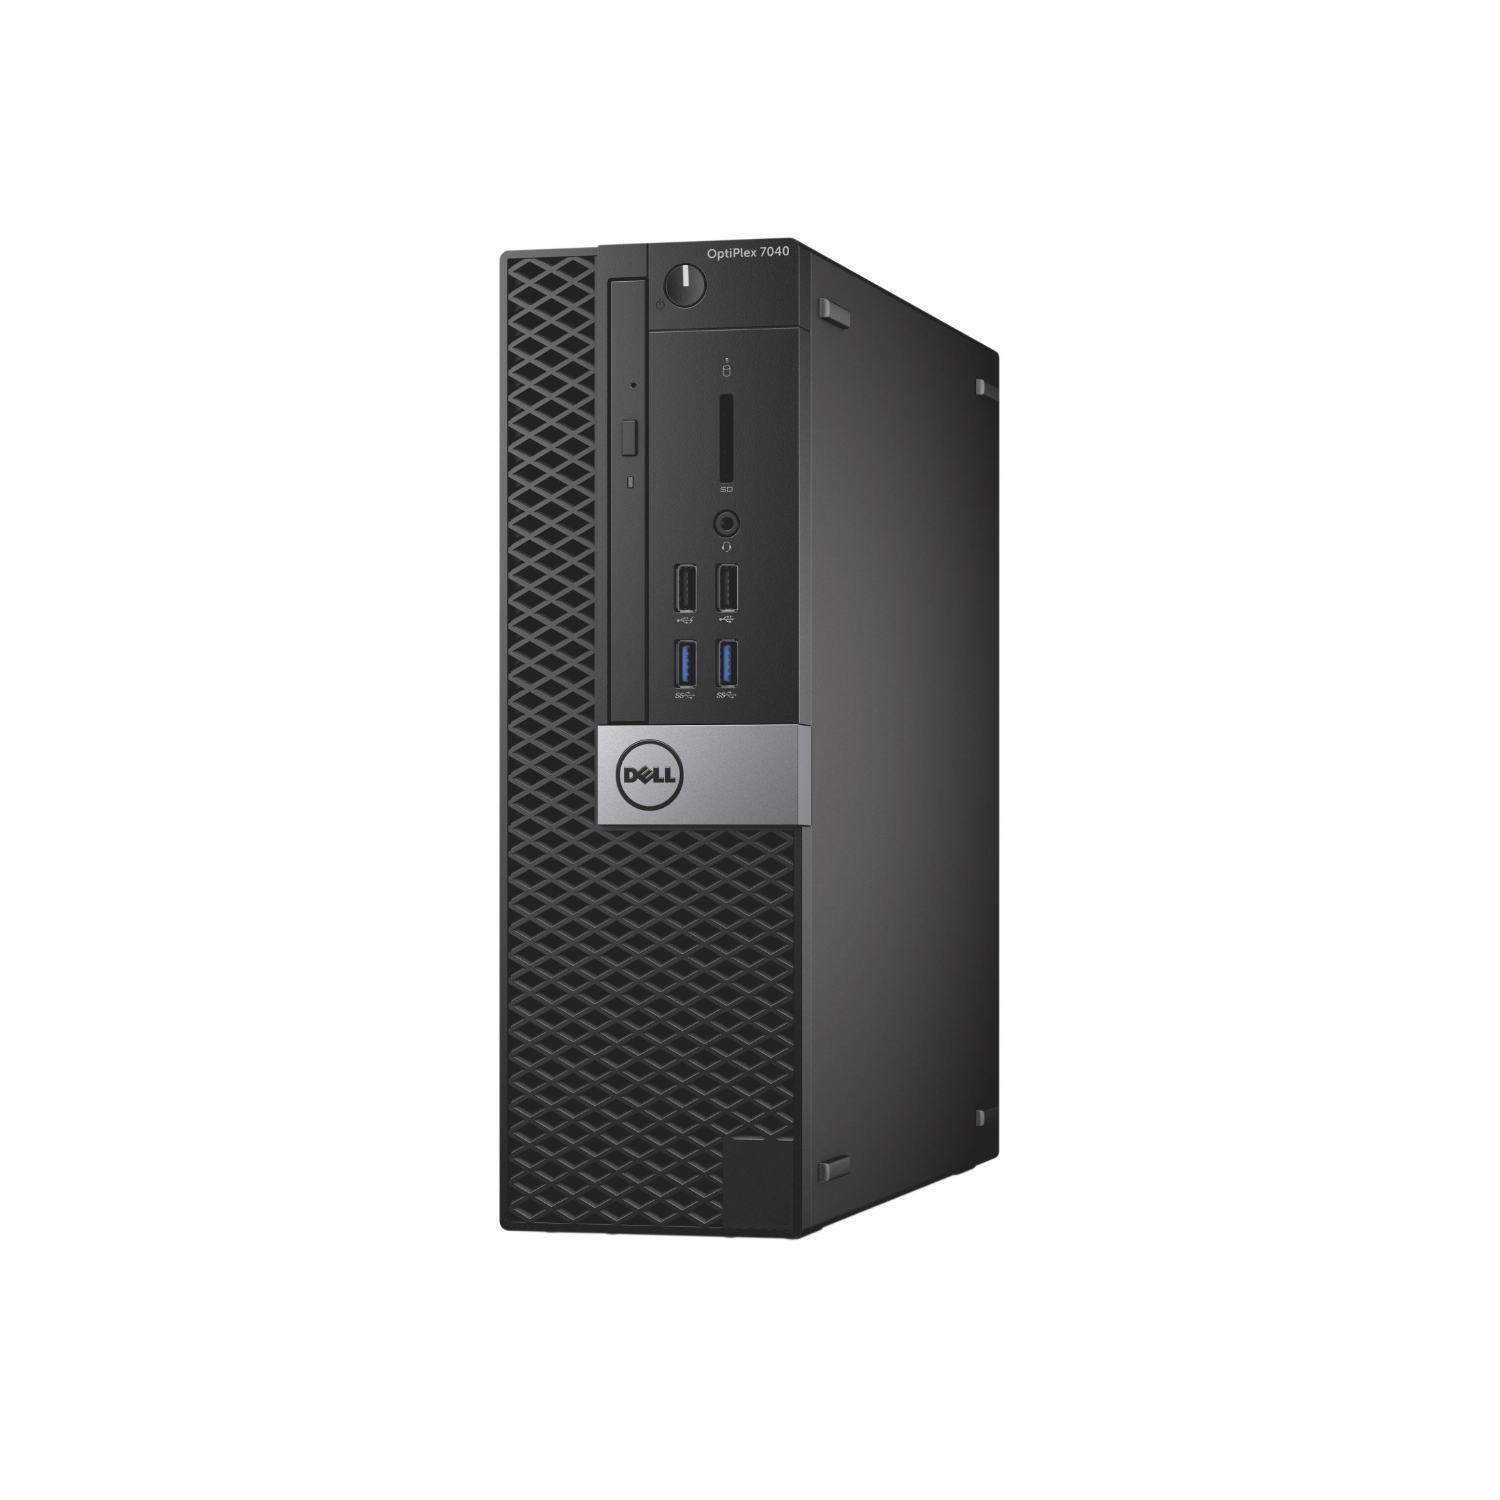 Refurbished (Good) - Dell OptiPlex 7040 Small Form Factor PC, Intel Core i5-6500, 3.2Ghz, 16GB RAM, 256GB SSD, Keyboard and Mouse, Windows 10 Pro